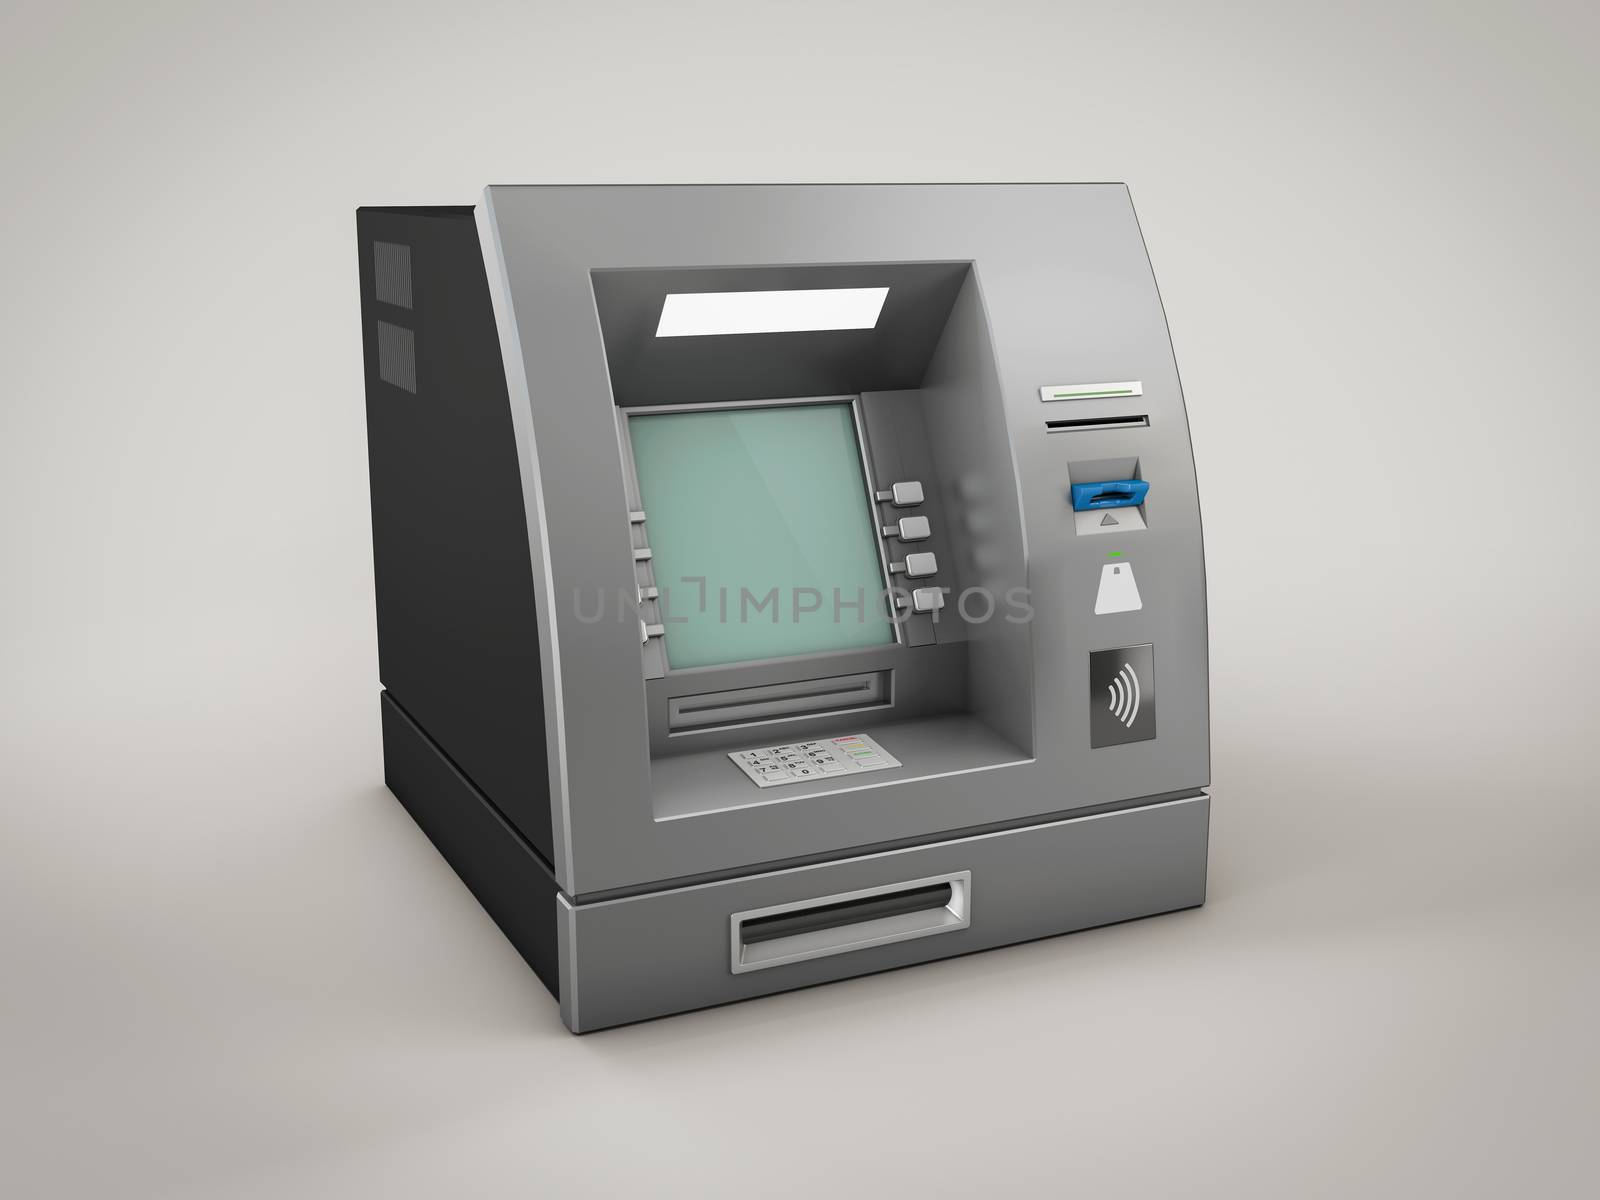 3d rendering of ATM Bank Cash Machine, clipping path included.